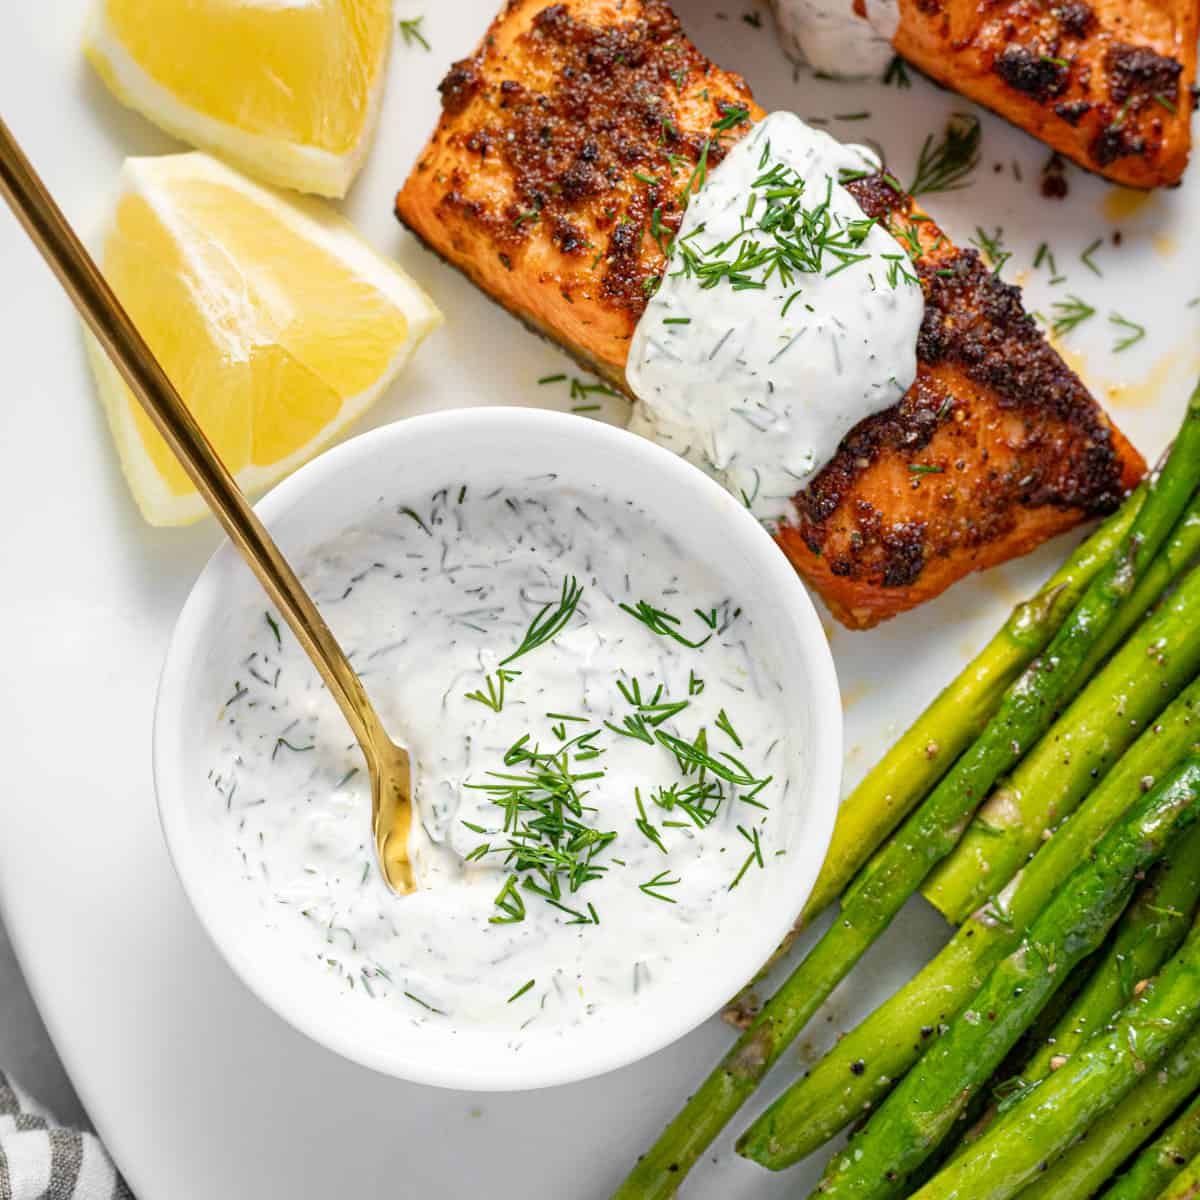 5 Minute Creamy Dill Sauce for Salmon